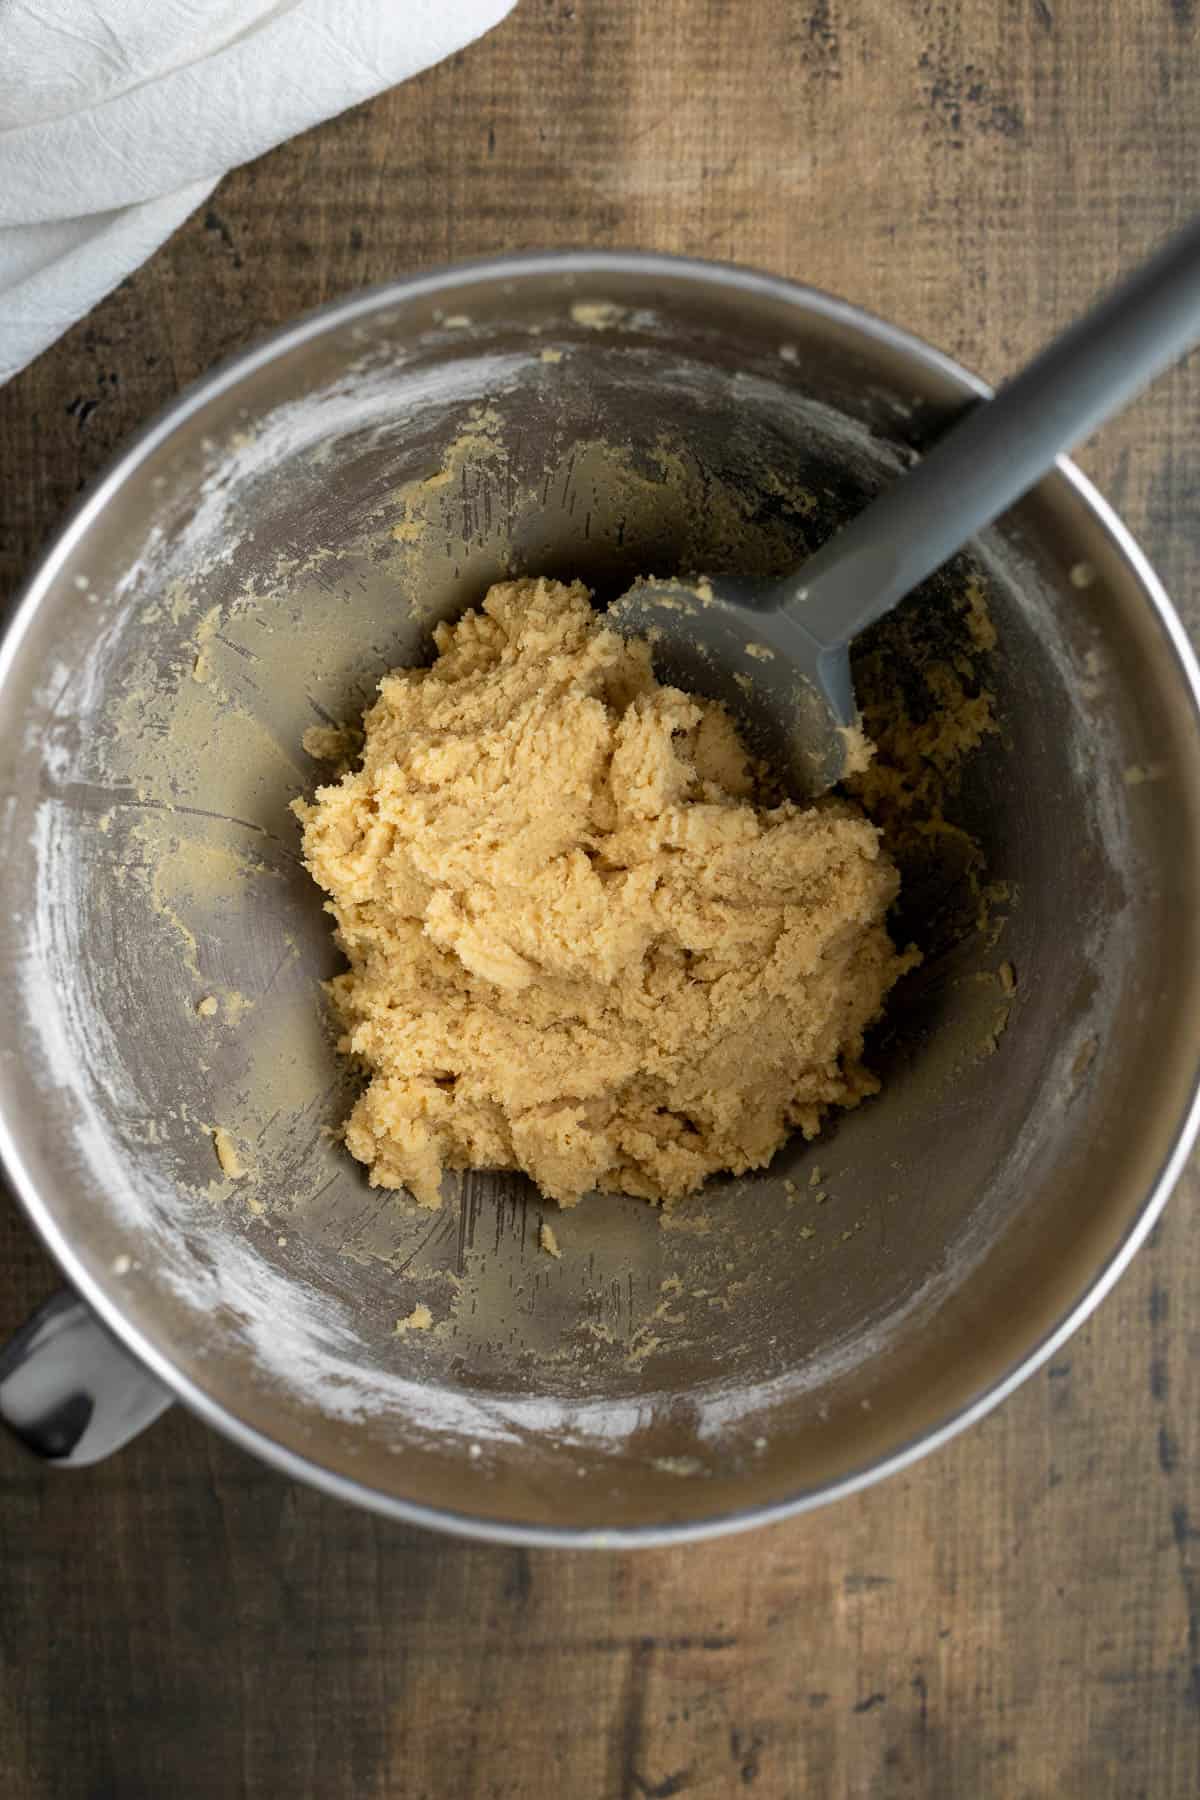 The cookie dough in a bowl before dying.